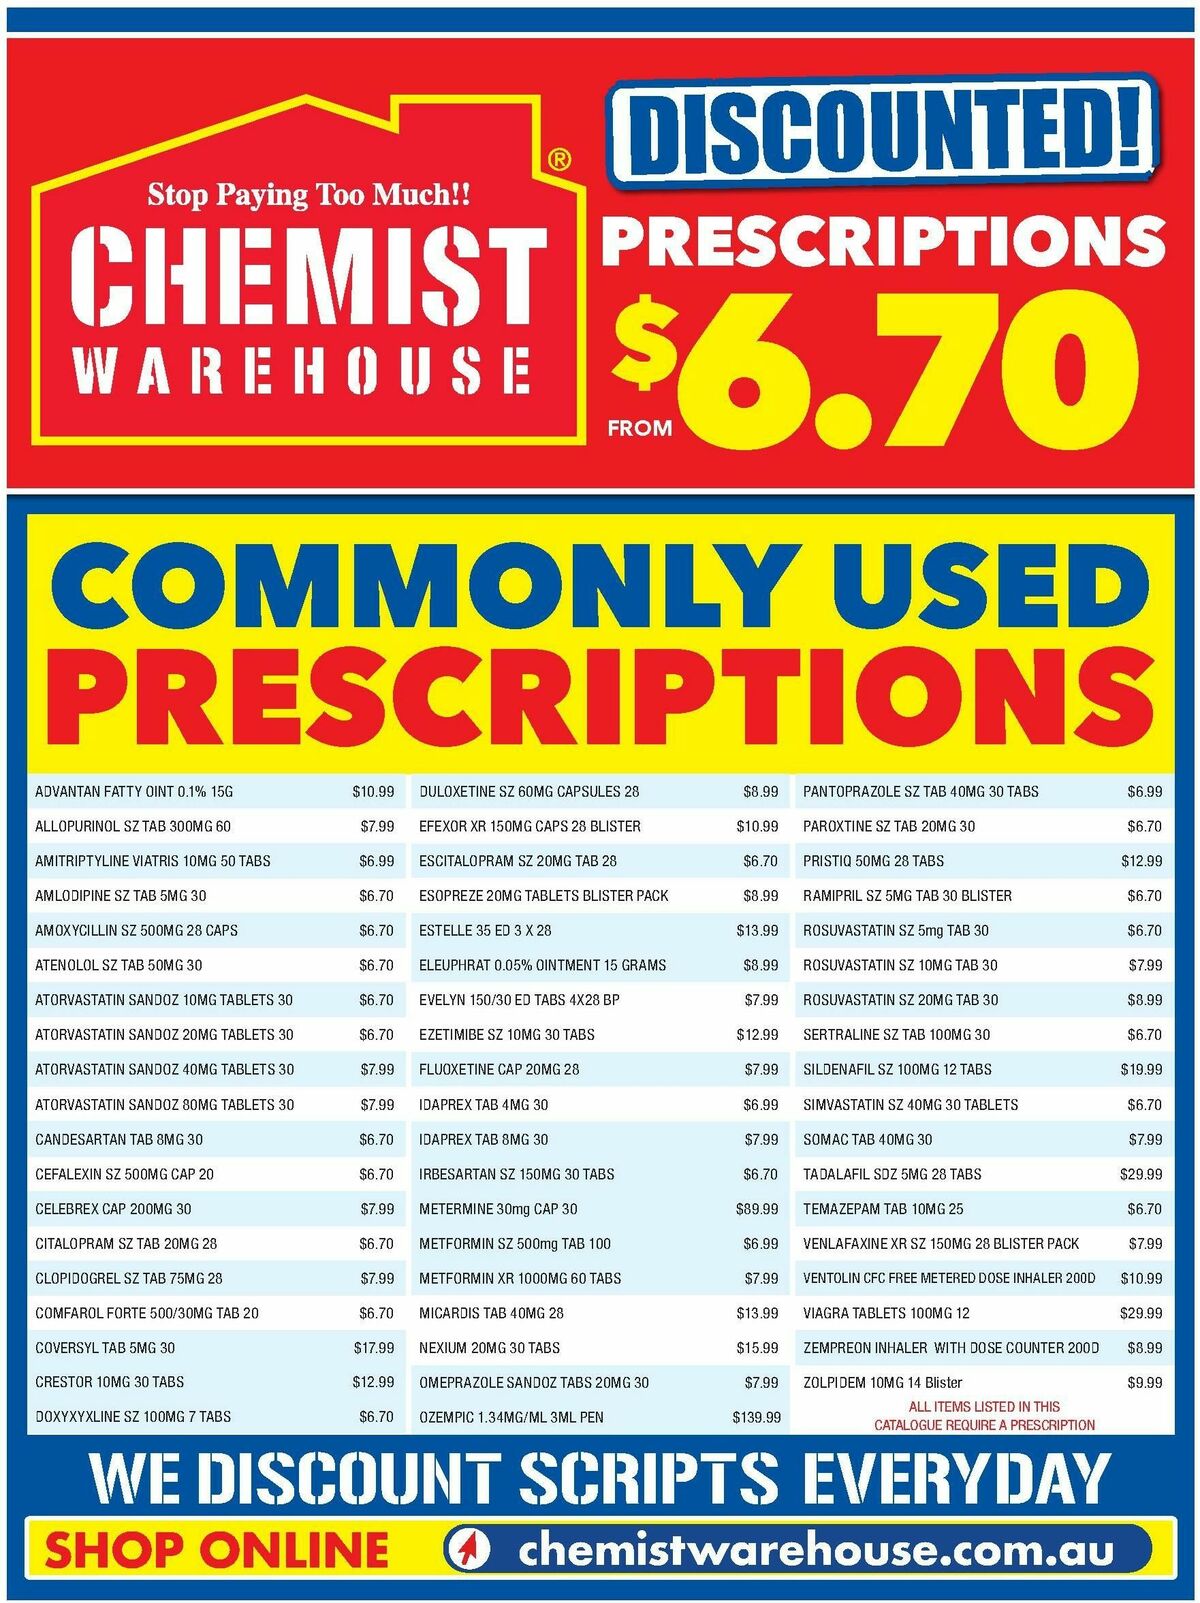 Chemist Warehouse Discounted! Prescriptions Catalogues from 22 April